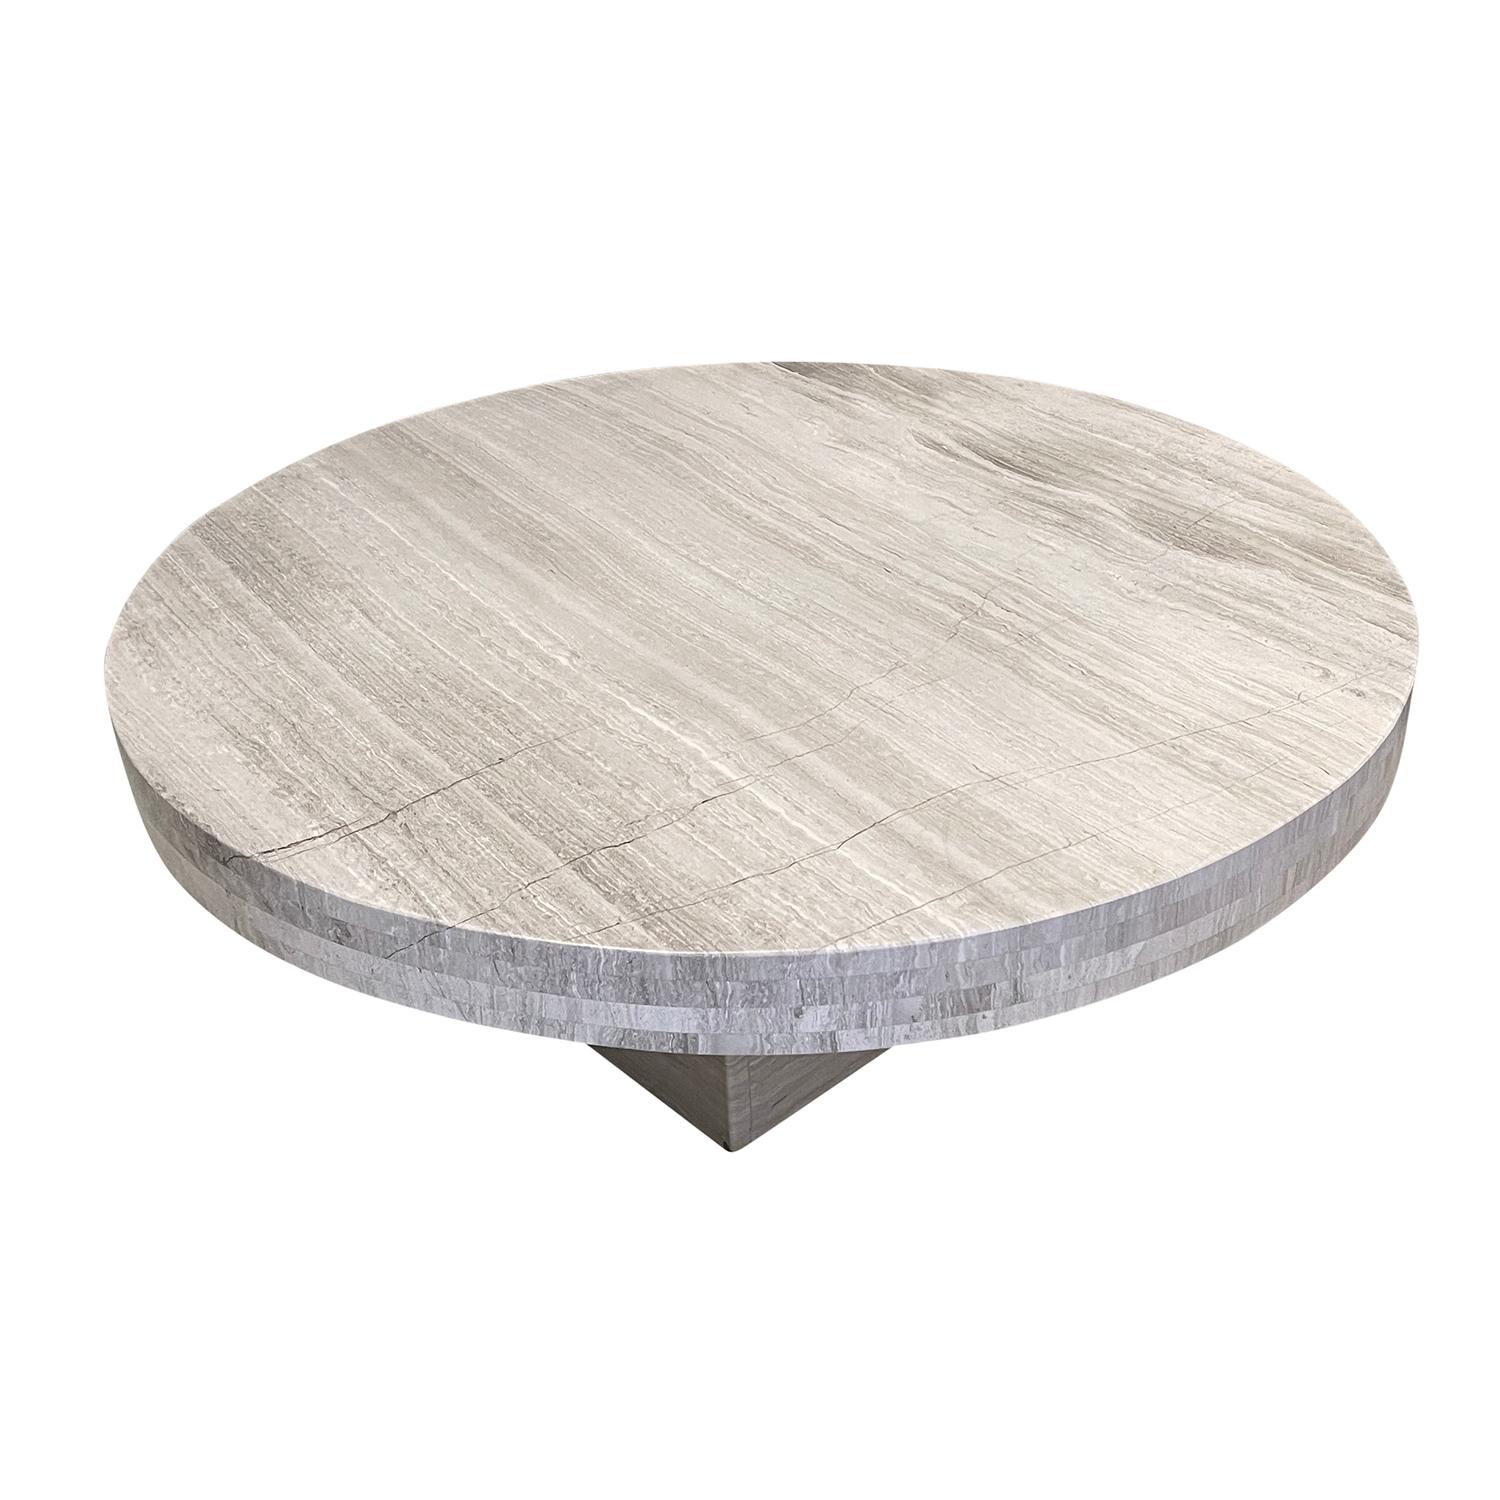 Hand-Crafted 21st Century Italian Minimalist Travertine Coffee Table - Round Sofa Table For Sale